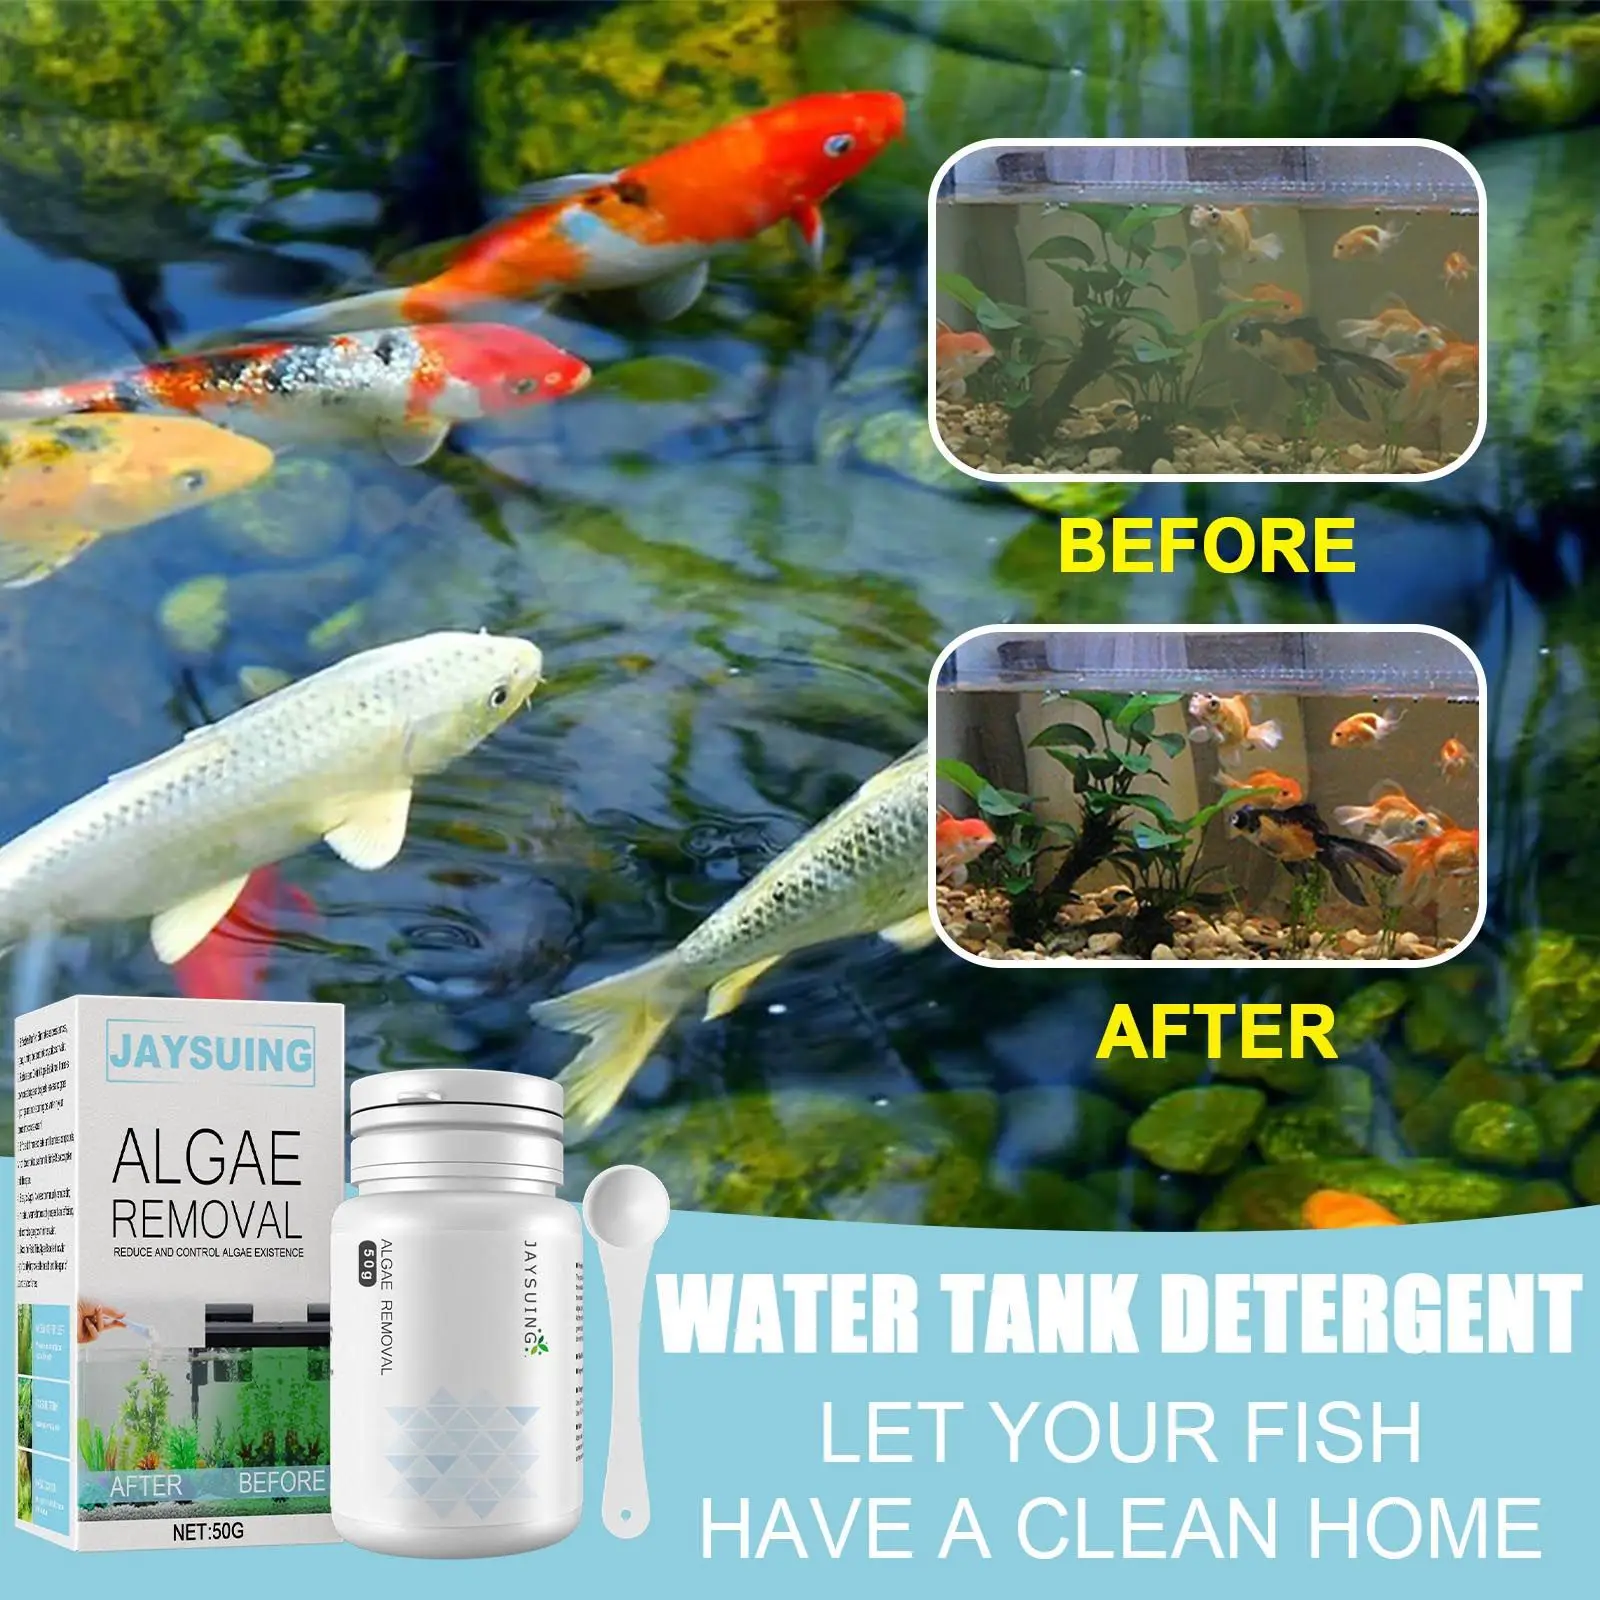 50g Aquarium Algaecide Aquatic Algae Removal Powder Control Detergent Purification Water Cleaning With Spoon Cleaning Tools